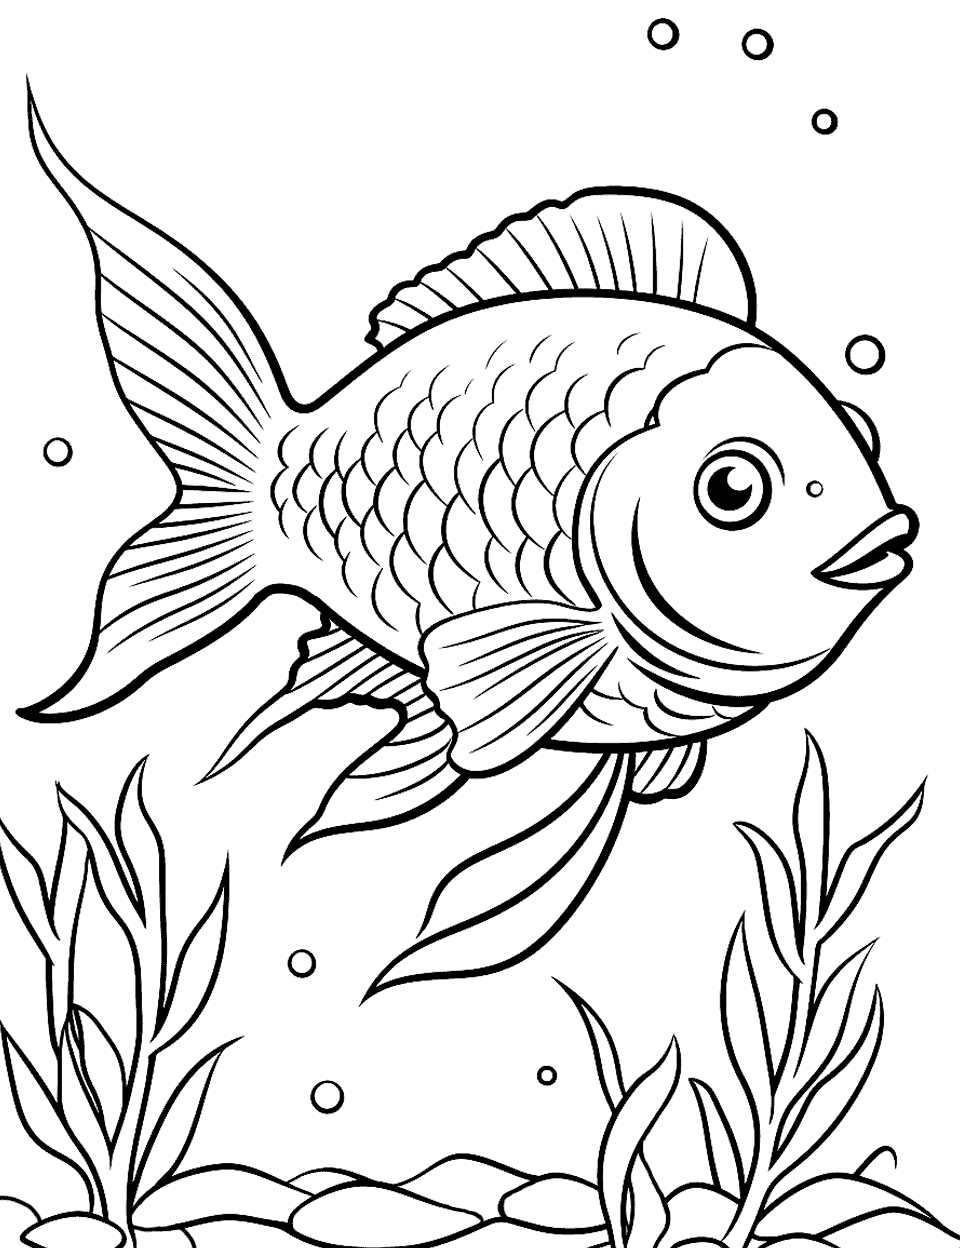 Bass Amidst the Weeds Fish Coloring Page - A bass fish lurking in the underwater weeds, waiting for its next meal.